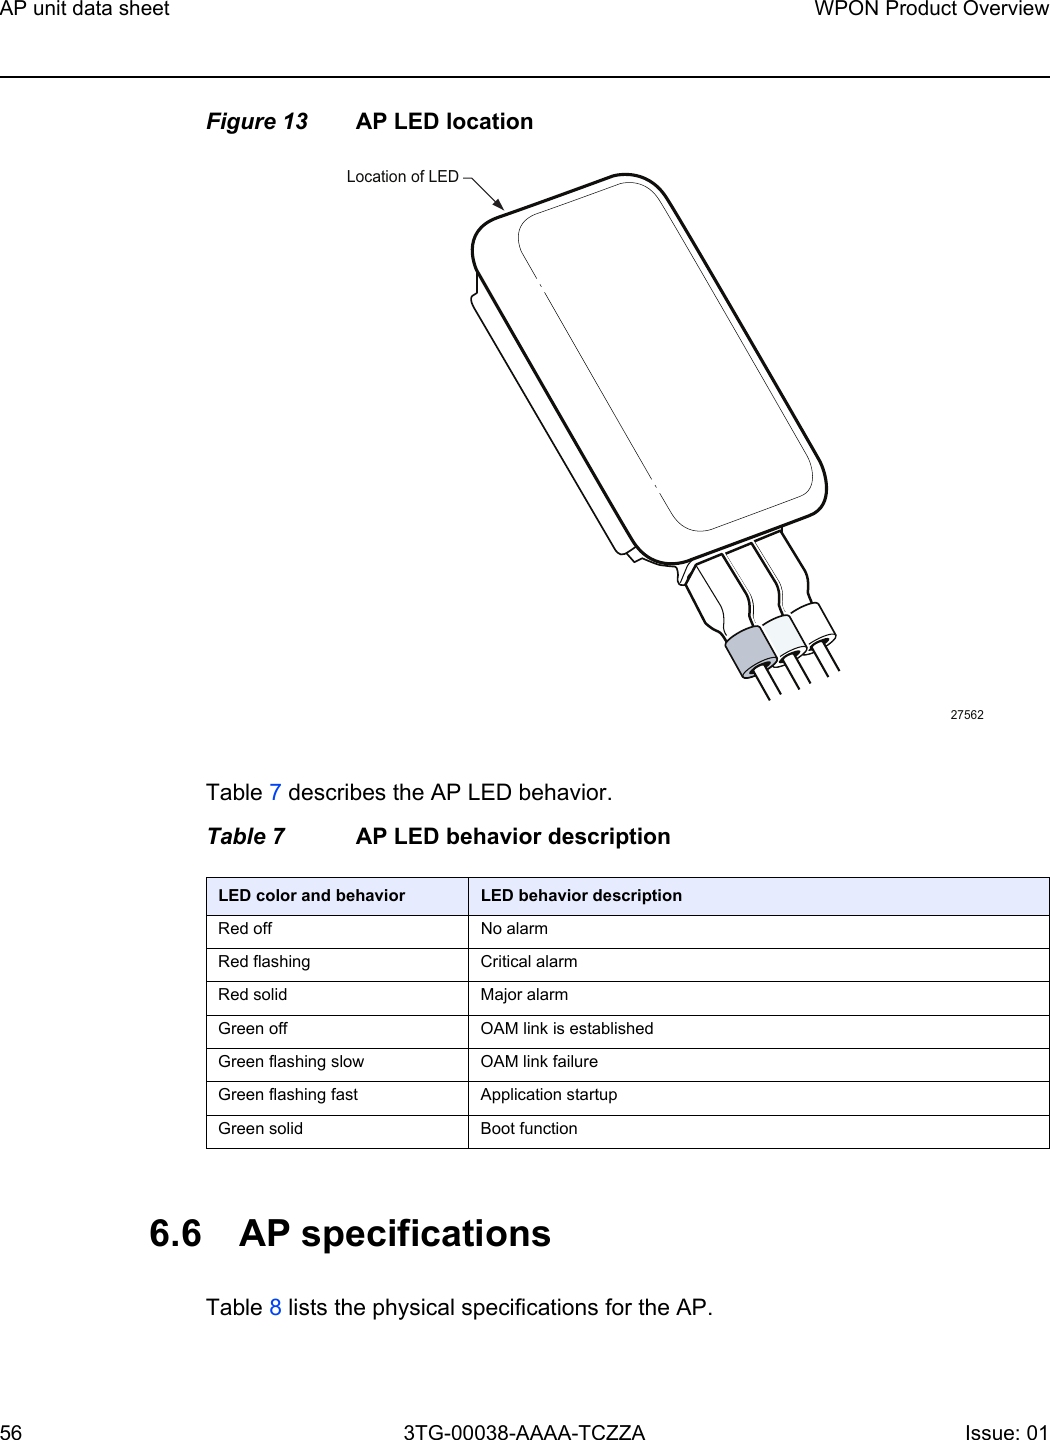 AP unit data sheet56WPON Product Overview3TG-00038-AAAA-TCZZA Issue: 01 Figure 13 AP LED locationTable 7 describes the AP LED behavior. Table 7 AP LED behavior description6.6 AP specificationsTable 8 lists the physical specifications for the AP. LED color and behavior LED behavior descriptionRed off No alarm Red flashing Critical alarmRed solid Major alarmGreen off OAM link is established Green flashing slow OAM link failureGreen flashing fast Application startup Green solid Boot function27562Location of LED